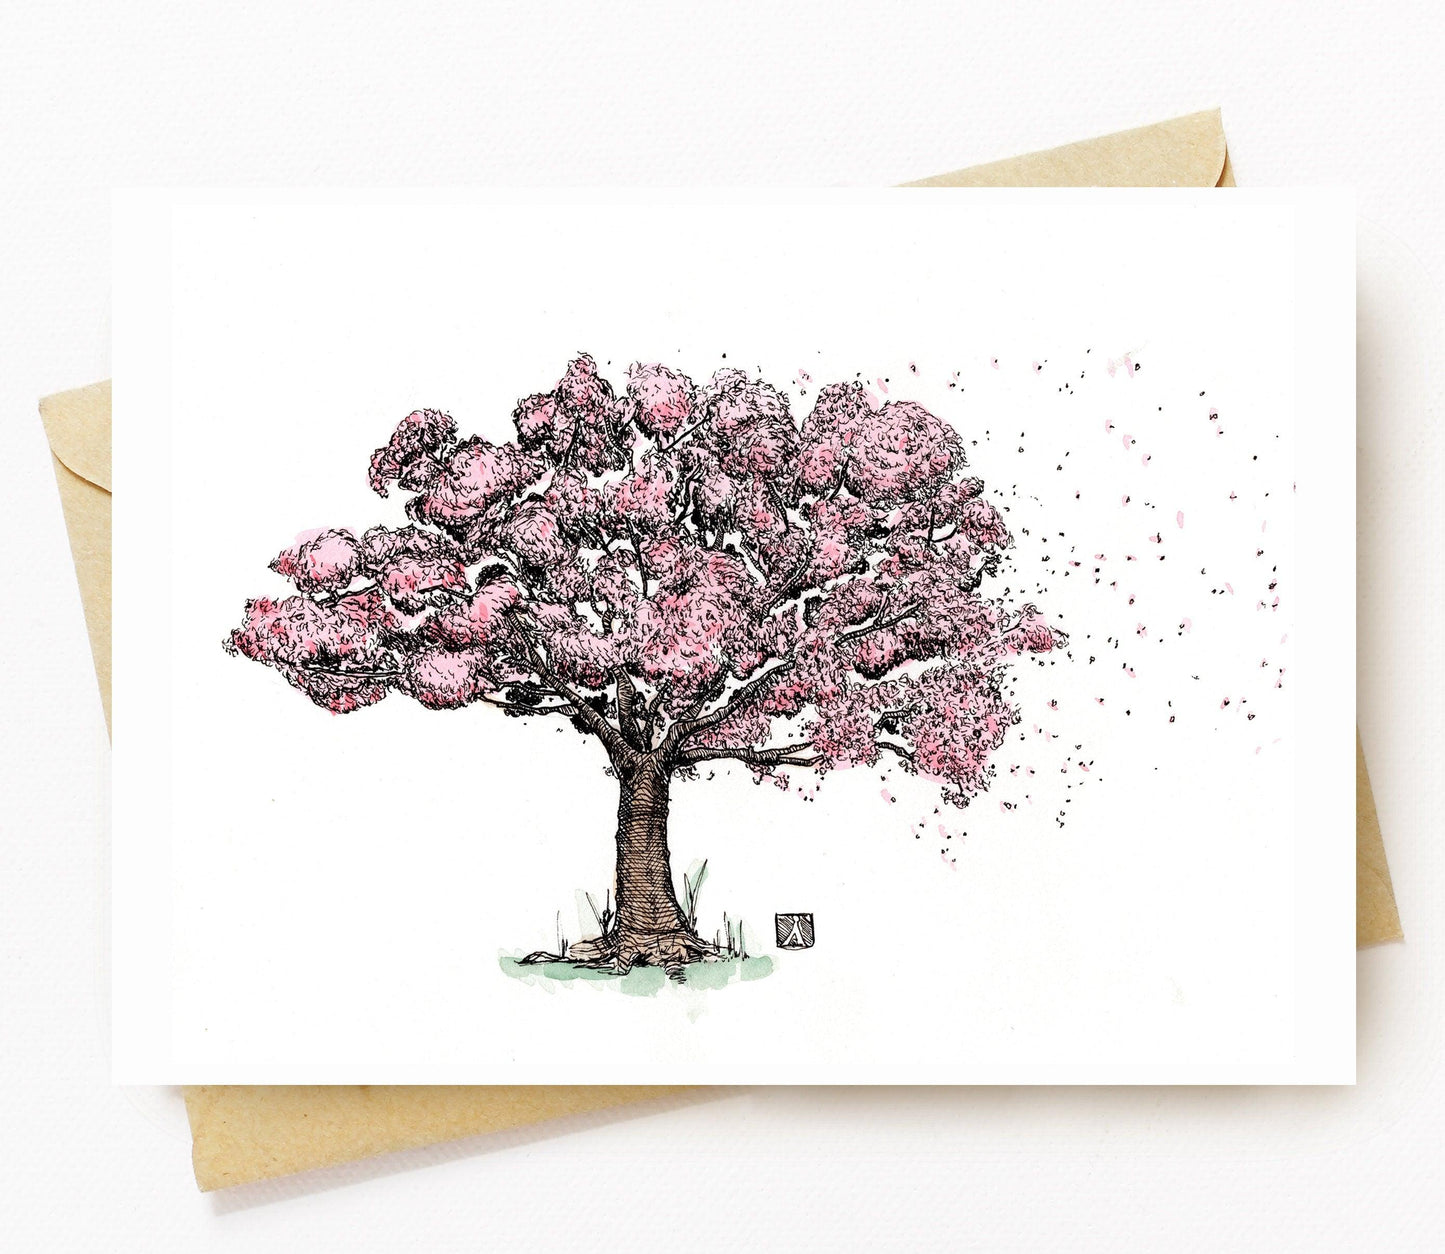 BellavanceInk: Greeting Card With A Pen & Ink Drawing With Watercolor of a Cherry Blossom Tree Being Blown In The Wind 5 x 7 Inches - BellavanceInk